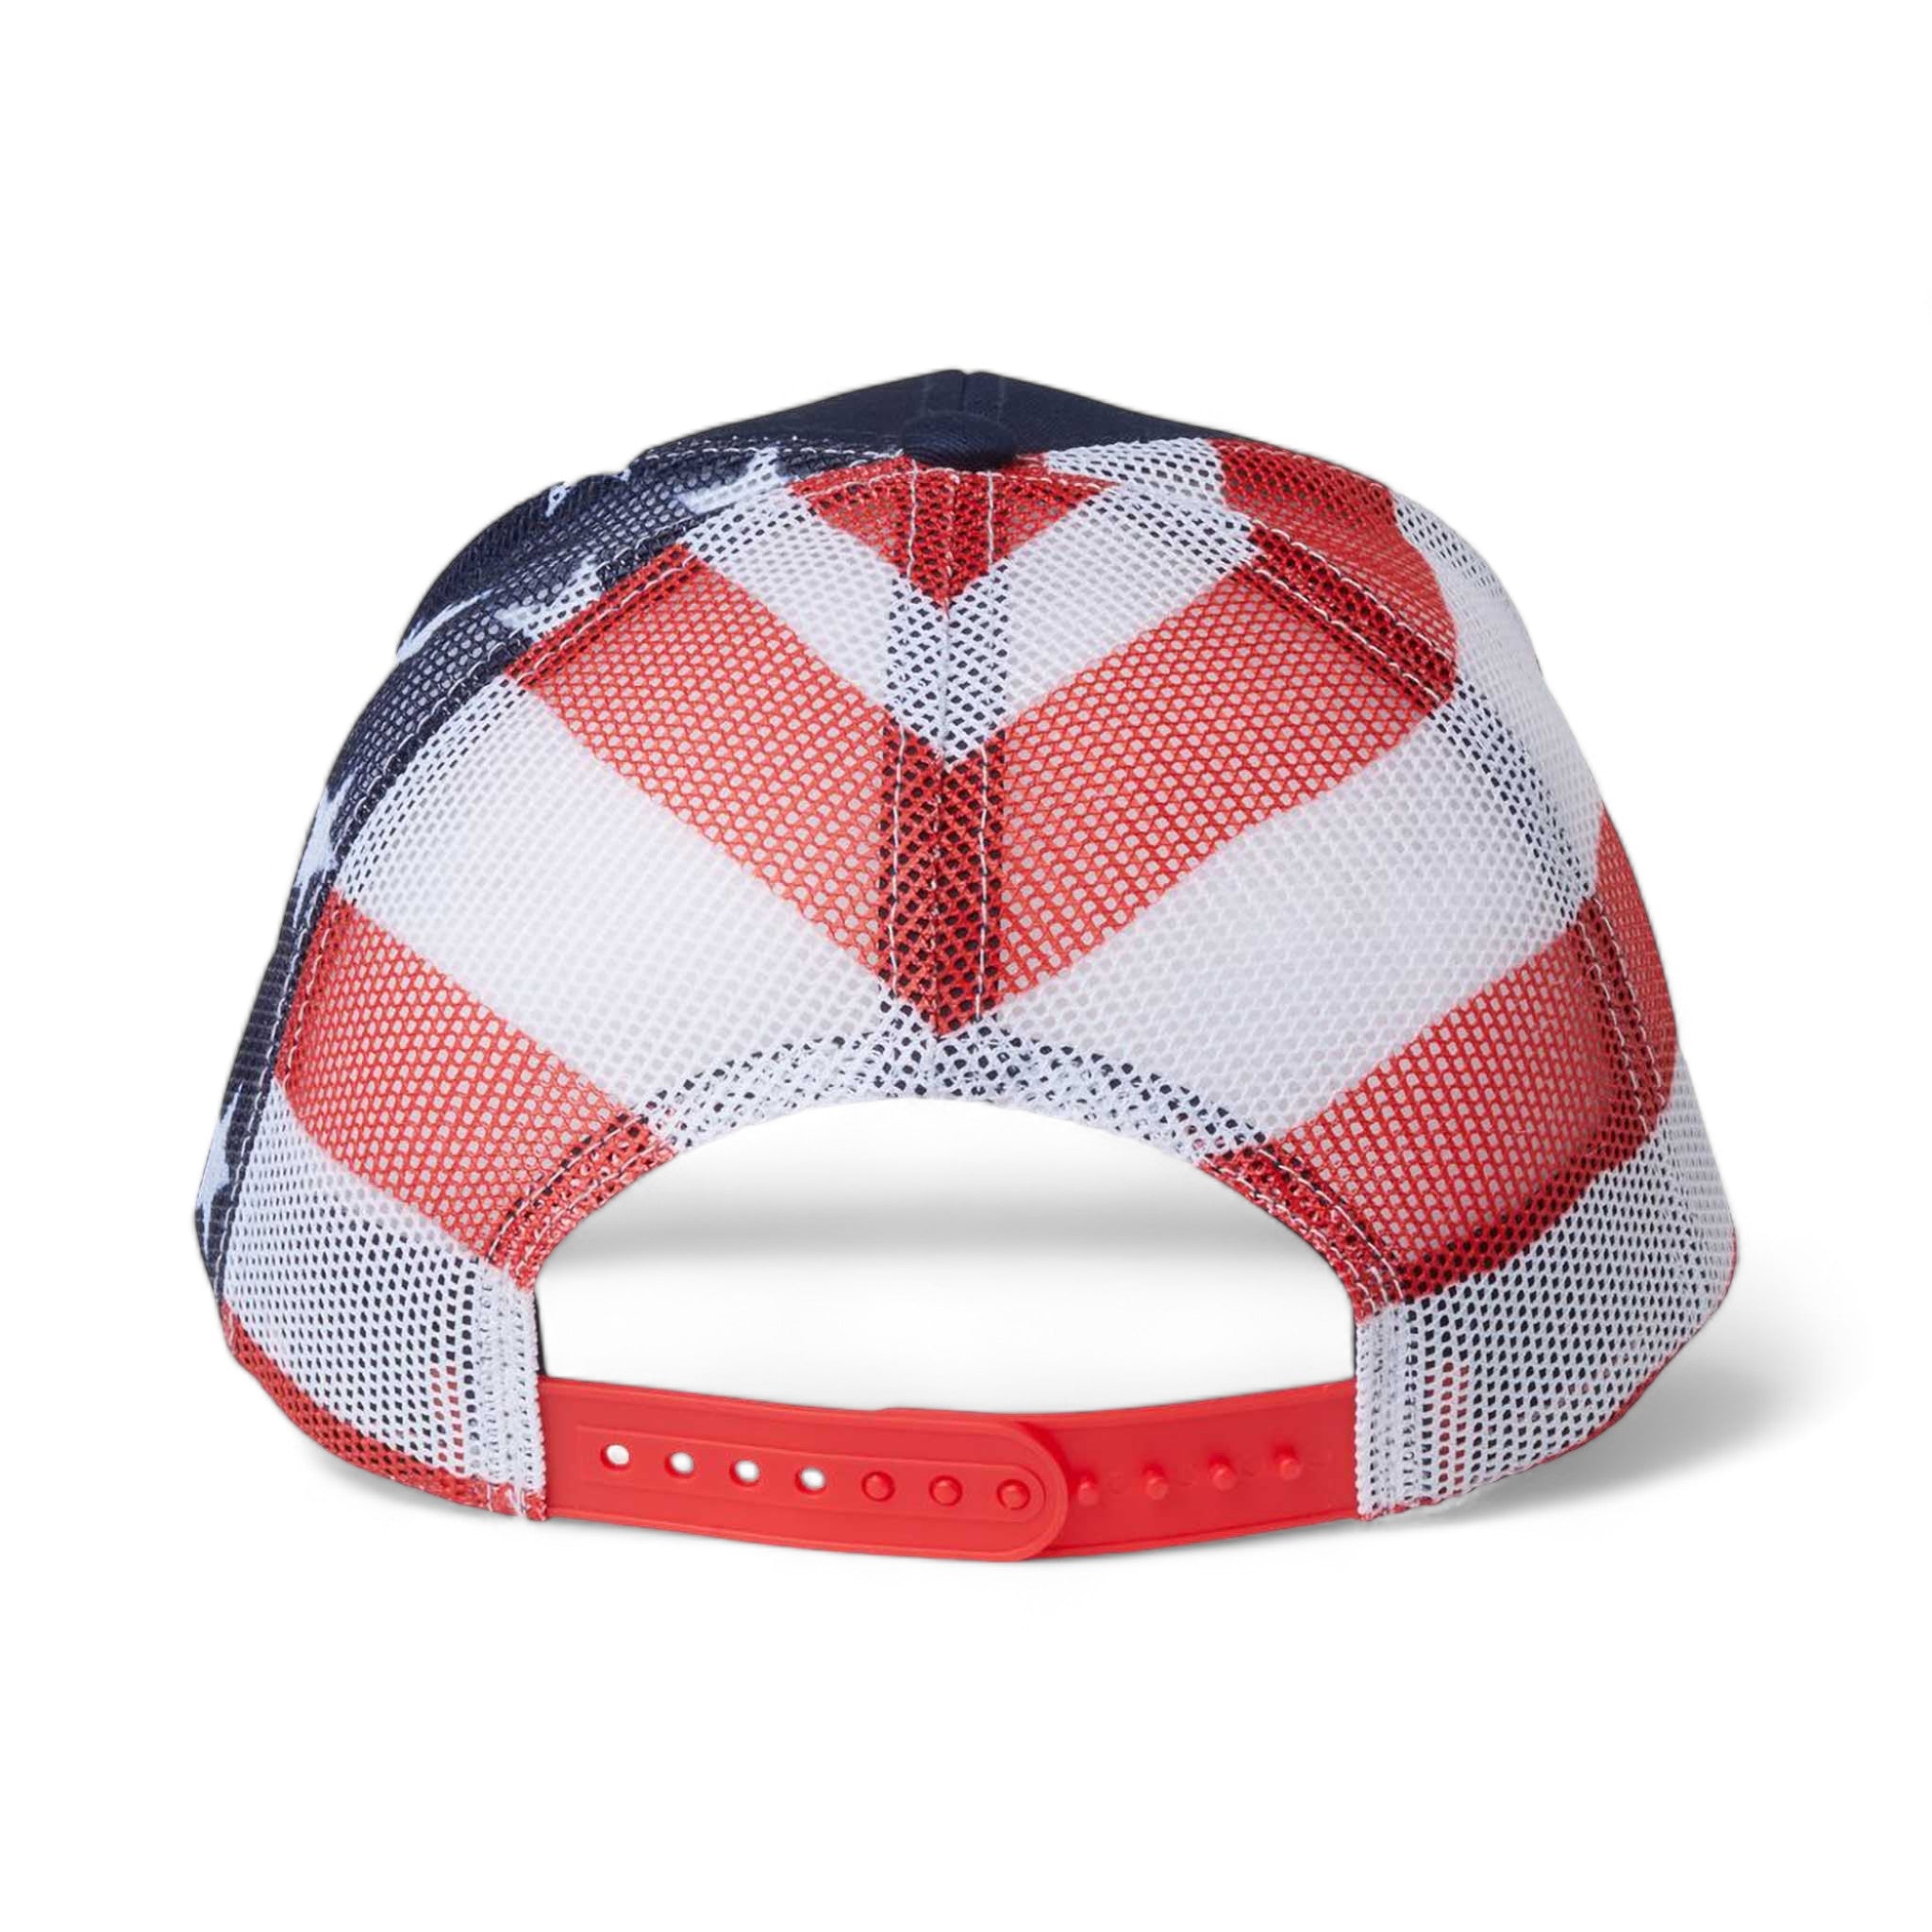 Back view of Kati S700M custom hat in navy and usa flag